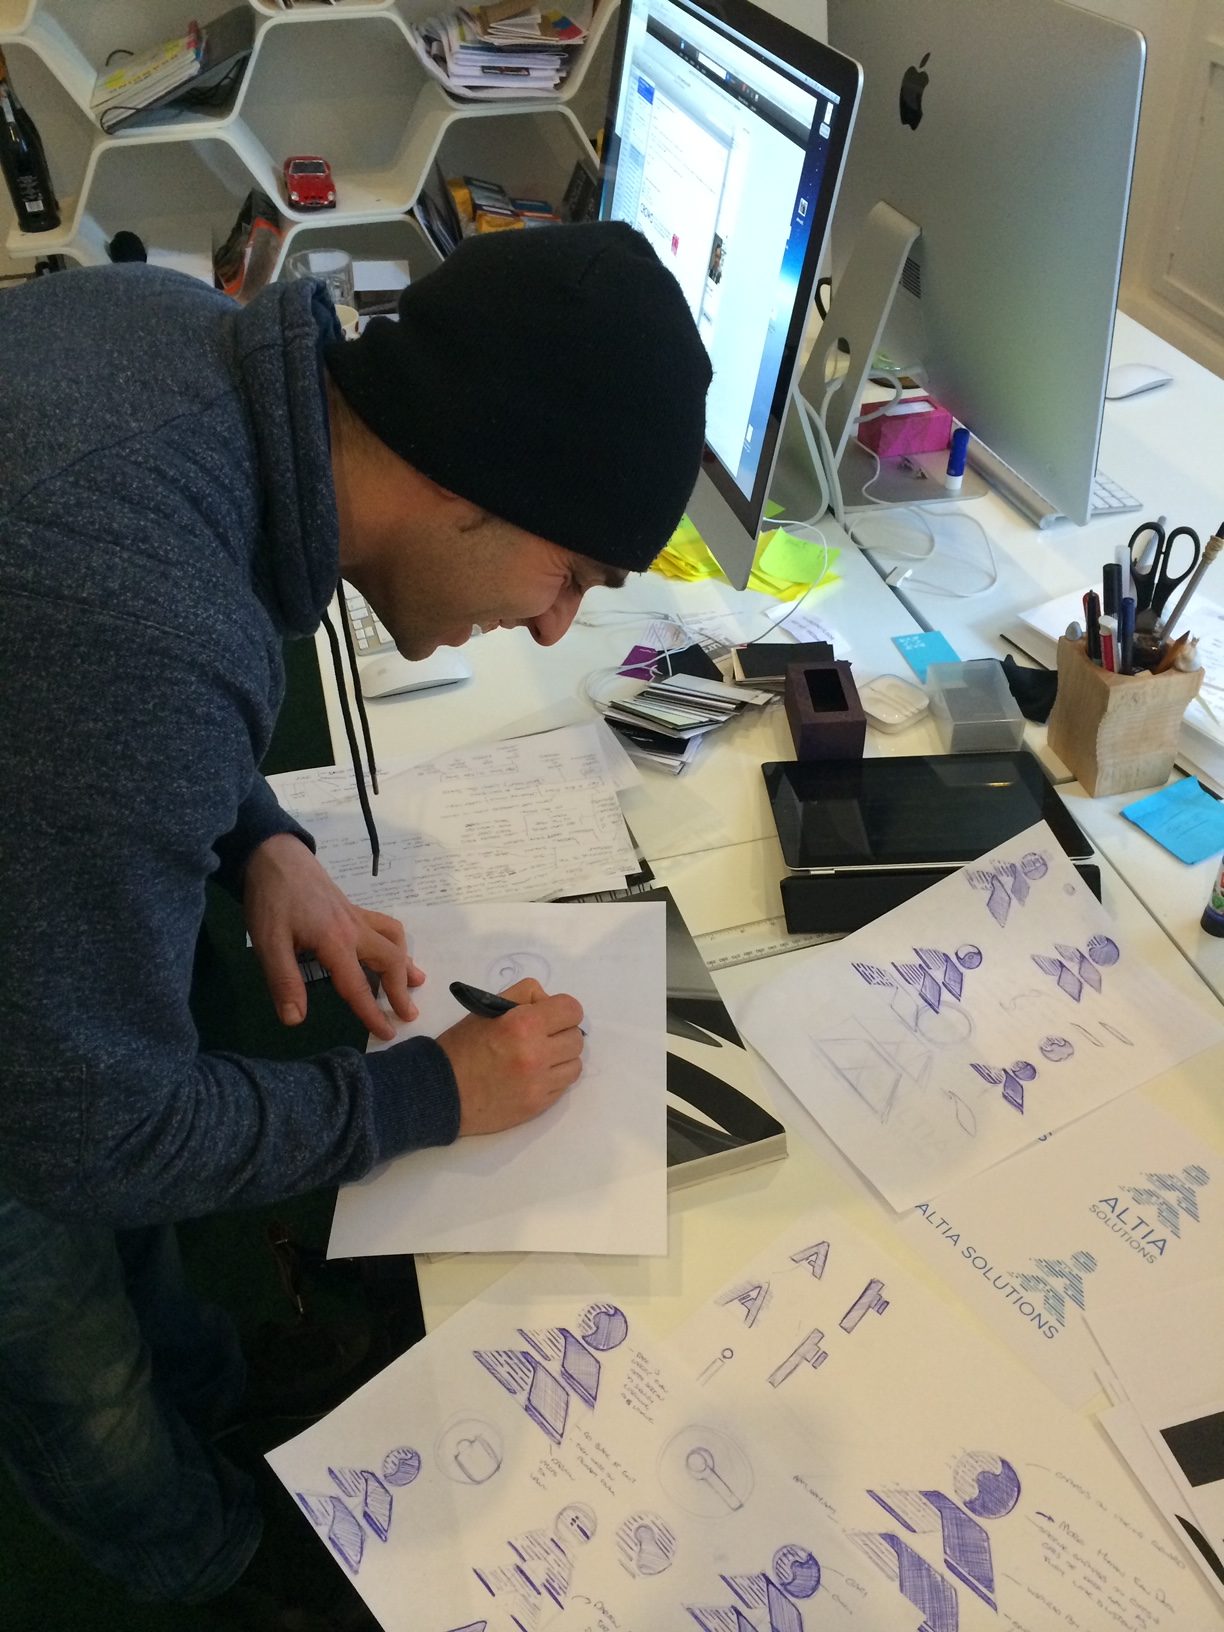 ‘Happy Sketching.’ Our Founder Benedetto happily sketching away concepts for the new Altia brand identity.